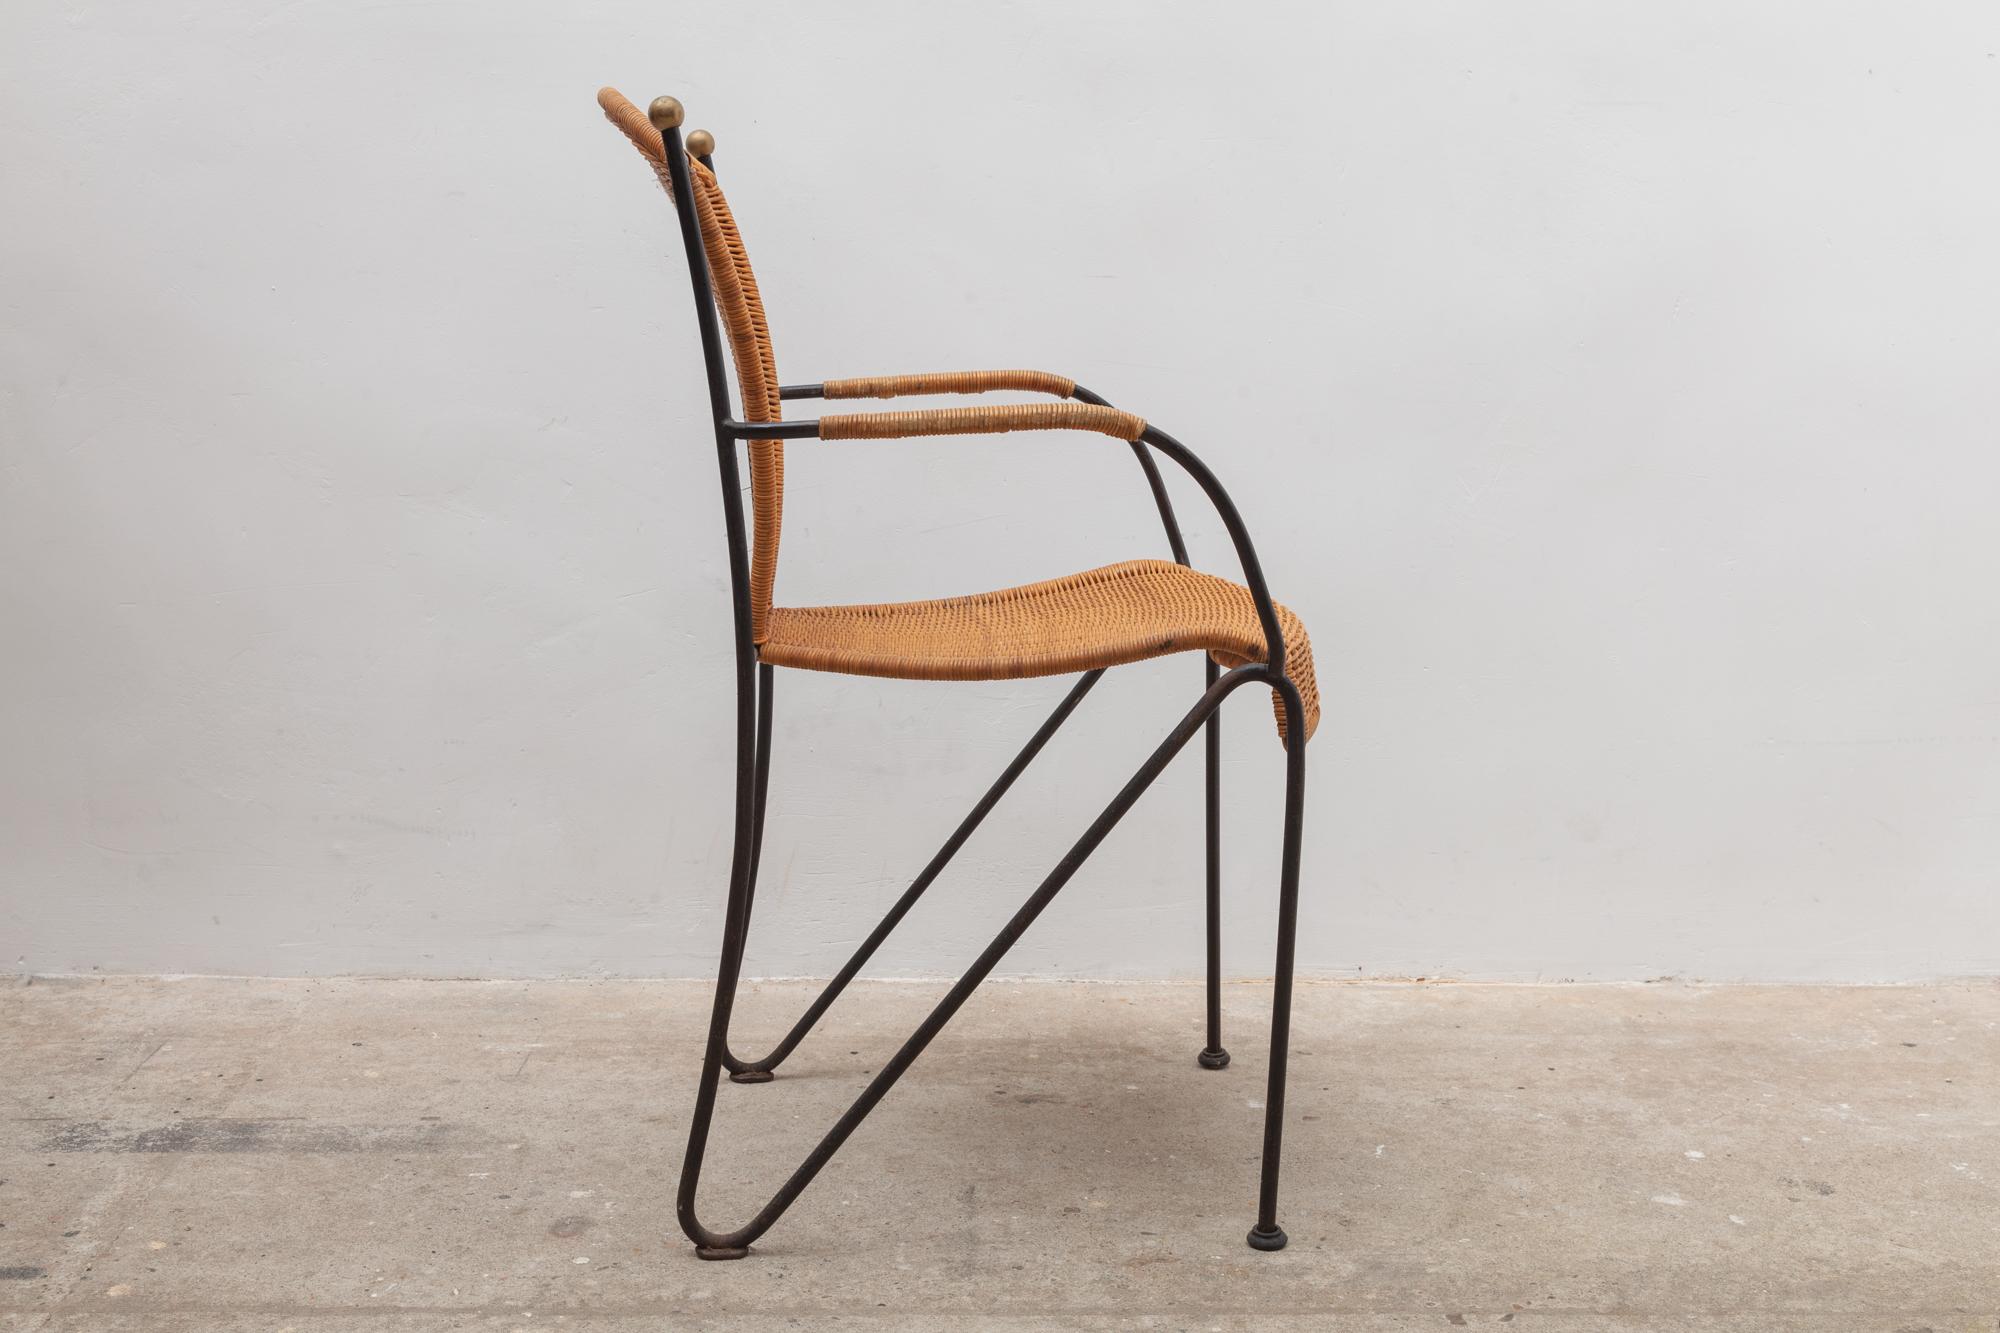 Late 20th Century Iron and Rattan Indoor and Outdoor Patio Chairs by Pipsan Saarinen Swanson